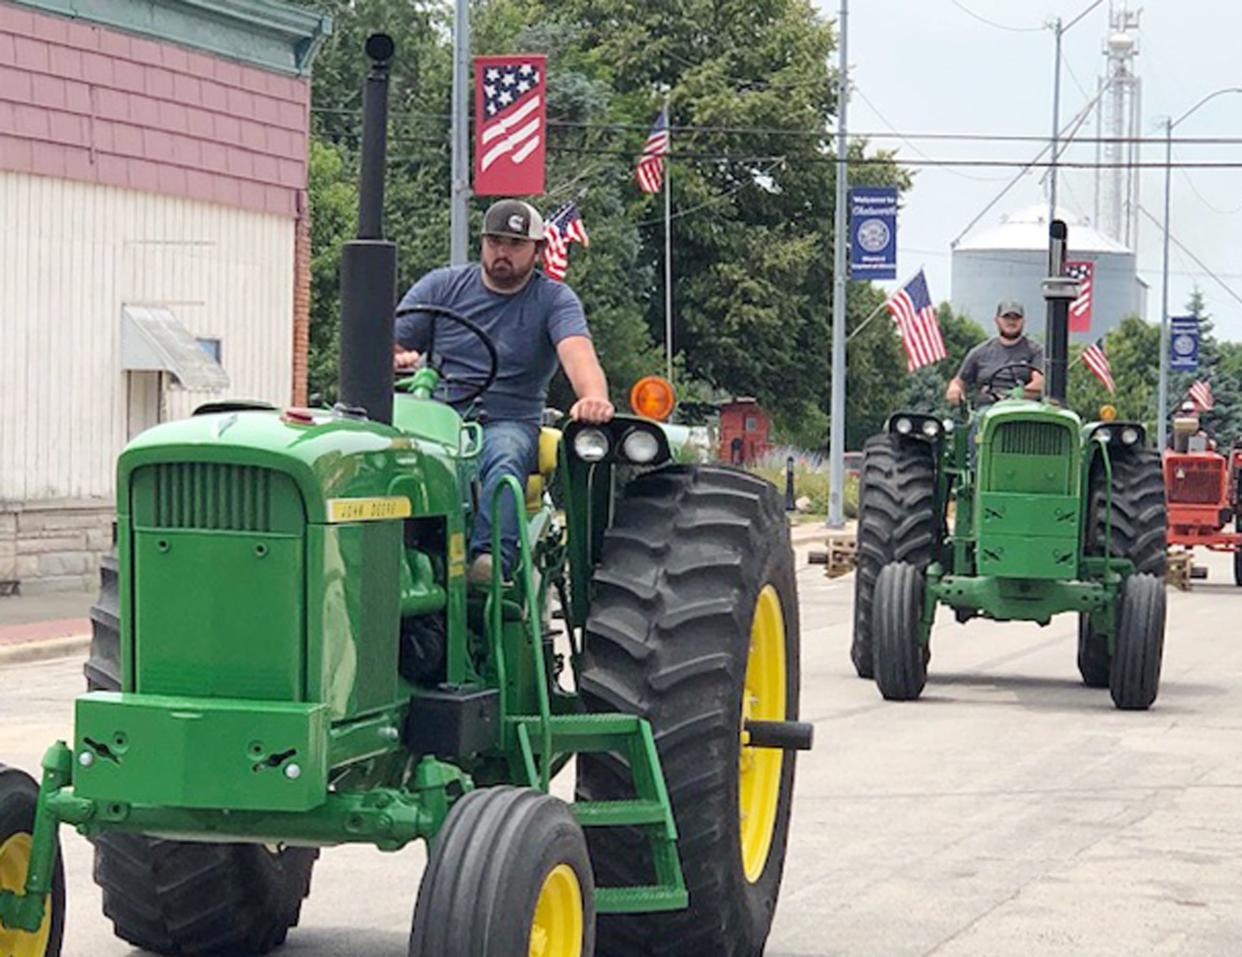 Drivers take off from Sibley on their annual Sibley Burr Oaks Tractor Drive over the weekend.